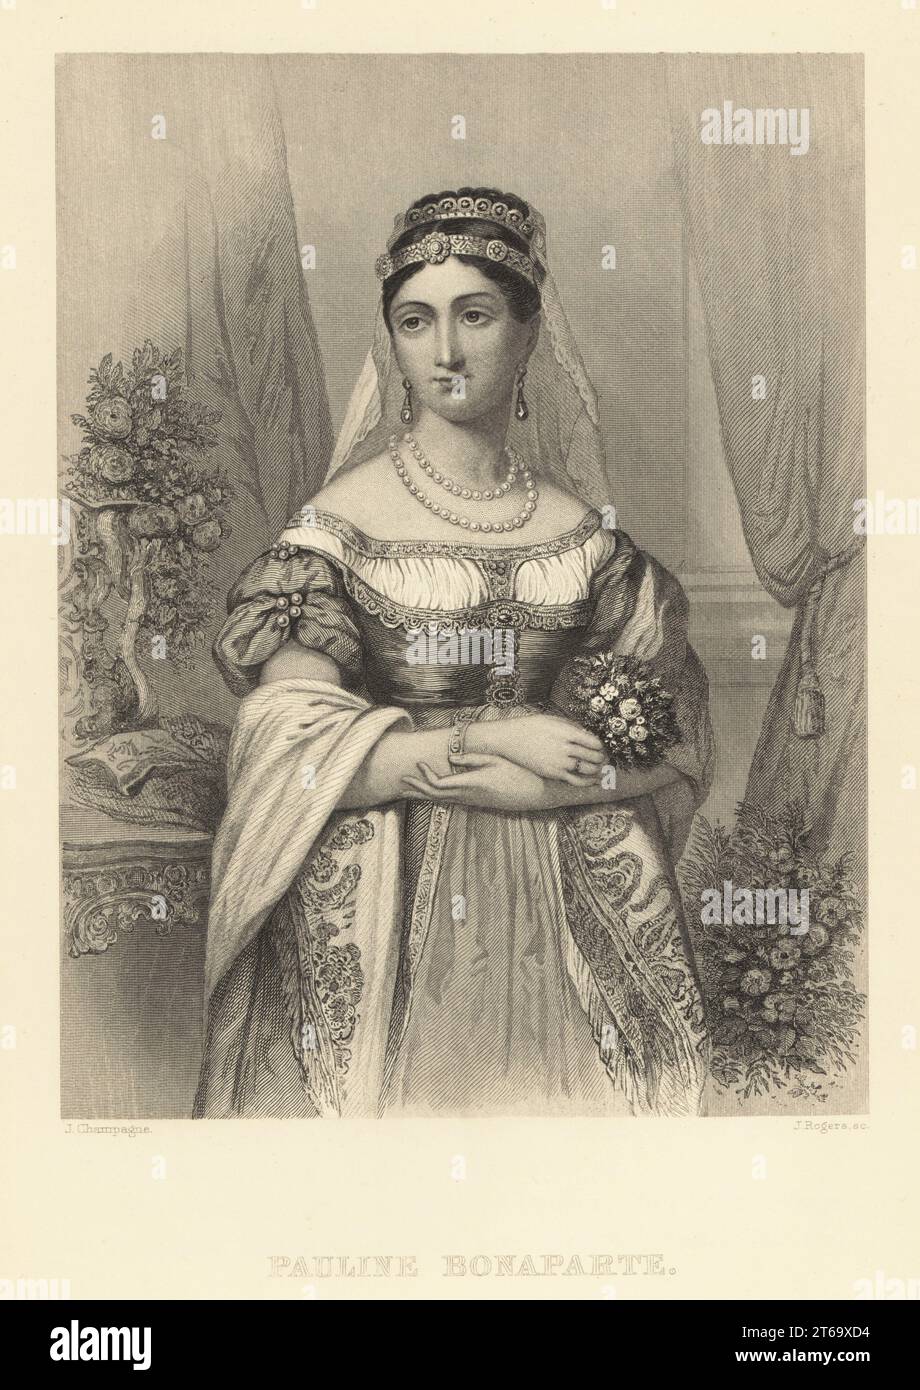 Pauline Bonaparte, younger sister of Napoloen, 1780-1825. Born Paula Maria Bonaparte Leclerc Borghese, imperial French princess, sovereign Duchess of Guastalla and the princess consort of Sulmona and Rossano. Steel engraving by John Rogers after a portrait by Jules Champagne from Frank B. Goodrichs The Court of Napoleon or Society under the First Empire, J. B. Lippincott, Philadelphia, 1875. Stock Photo